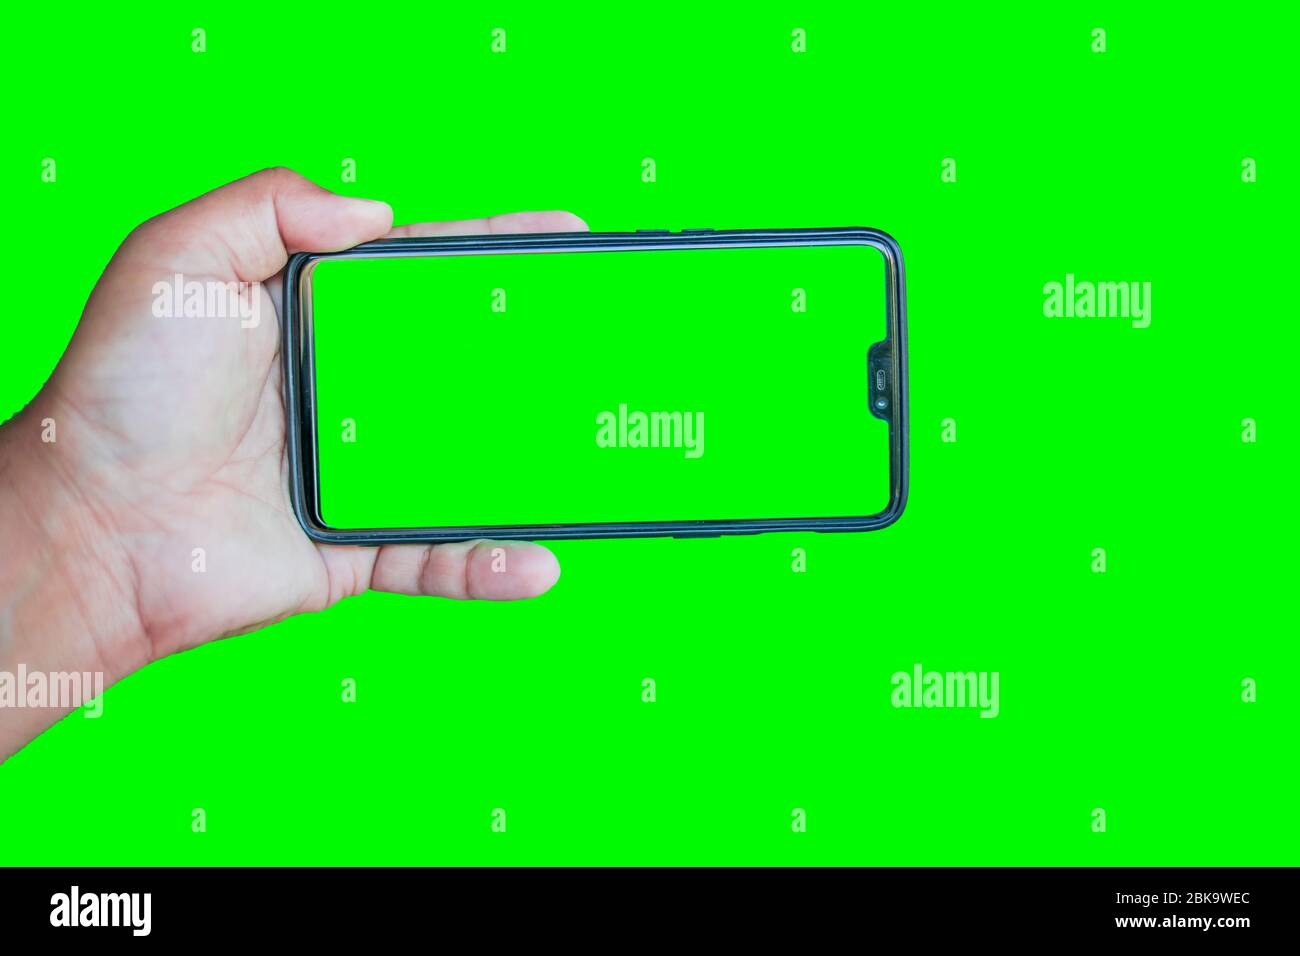 Man holding phone with chroma key display against the green screen  background Stock Photo - Alamy